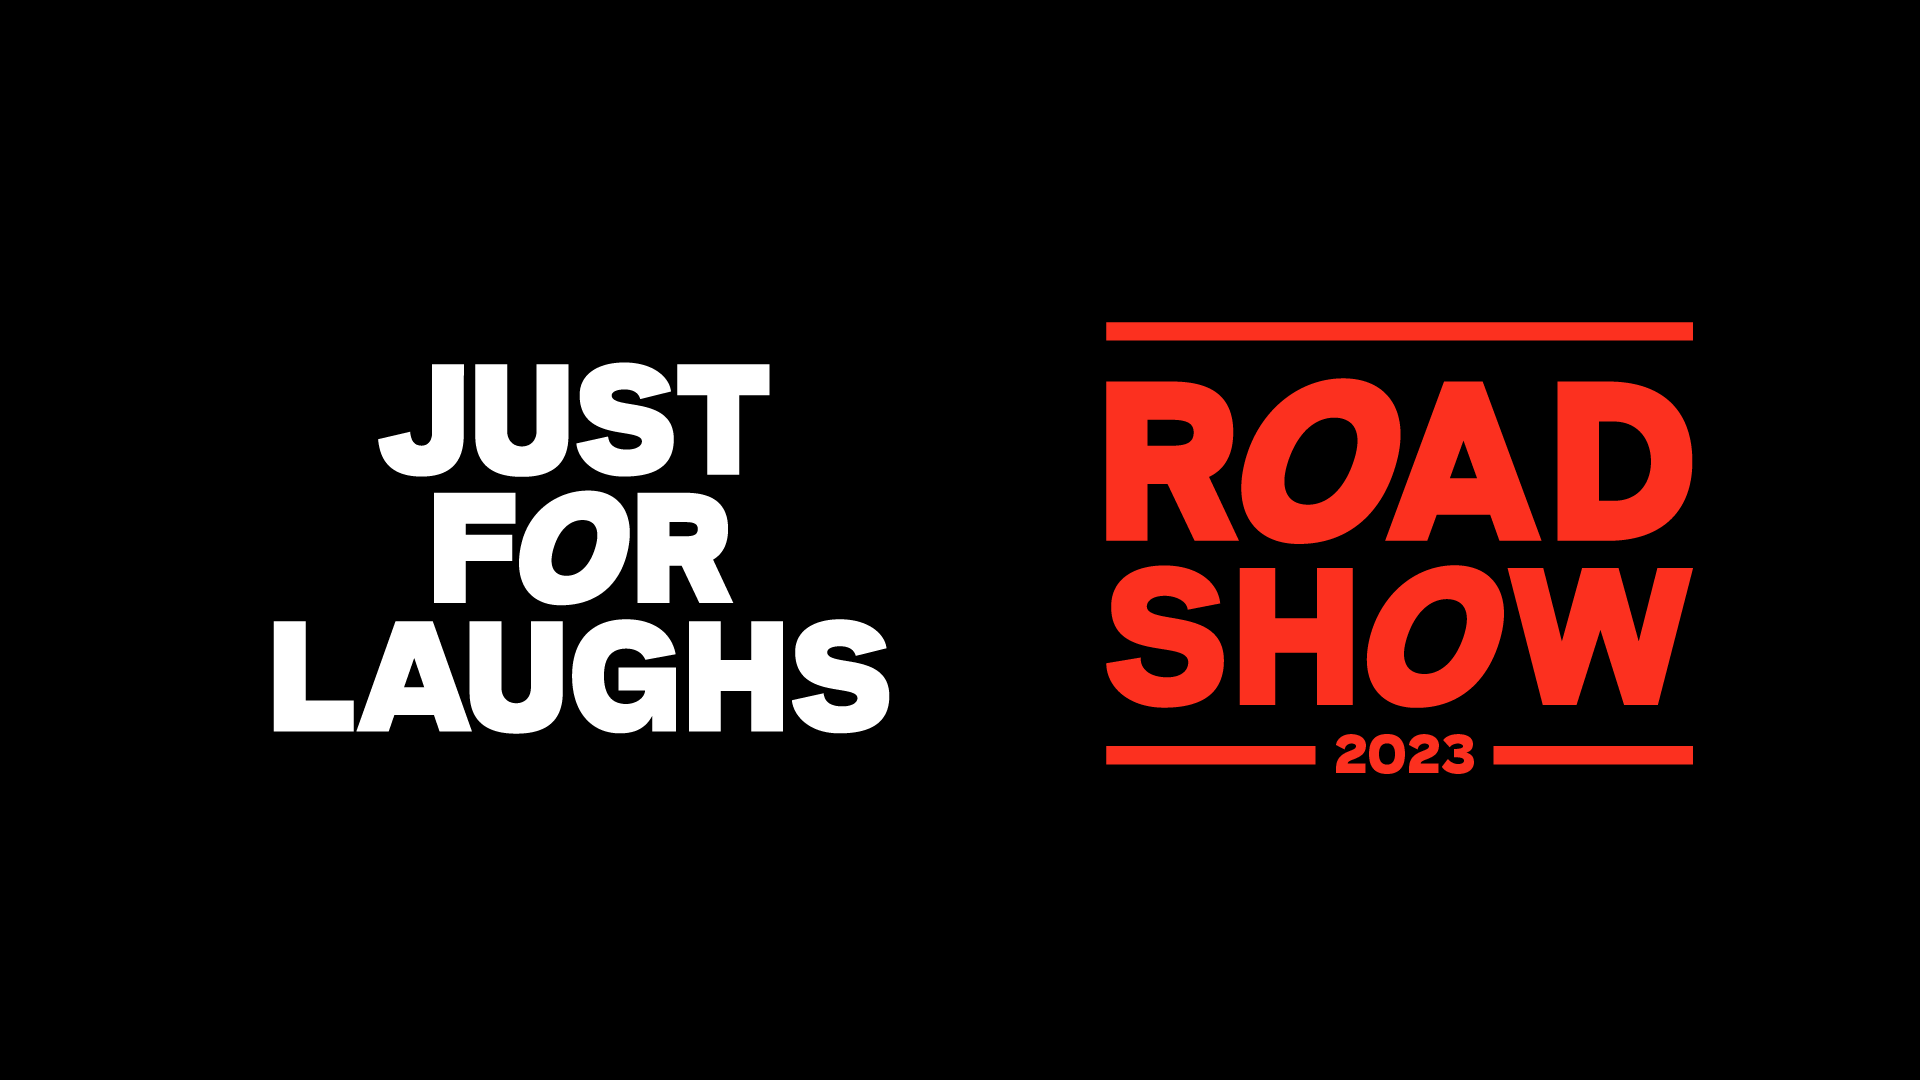 A black background. In white print reads, "JUST FOR LAUGHS" and in red print reads, "ROAD SHOW 2023"